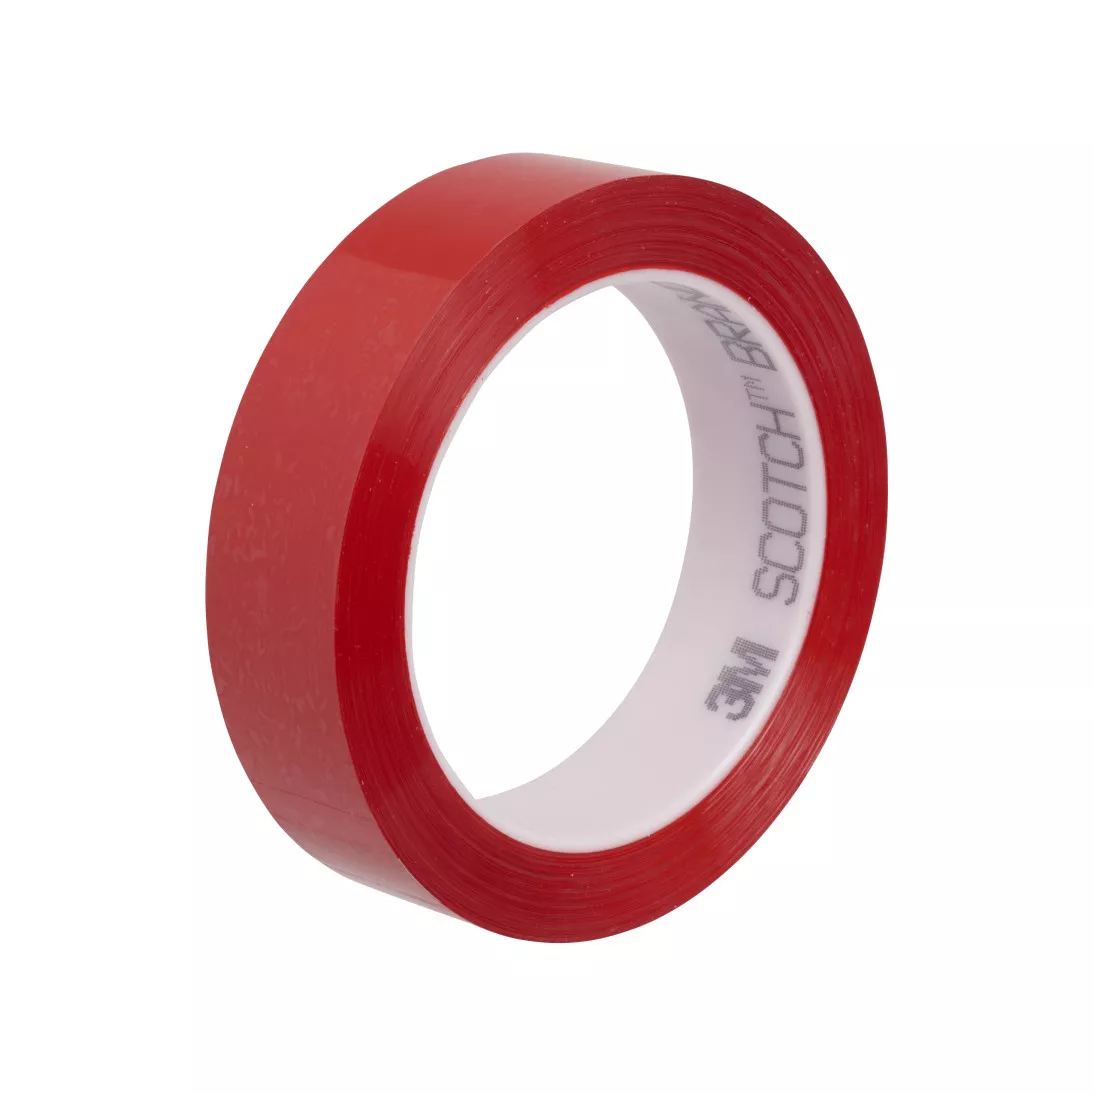 3M™ Polyester Film Tape 850, Red, 4 in x 72 yd, 1.9 mil, 8 rolls per case